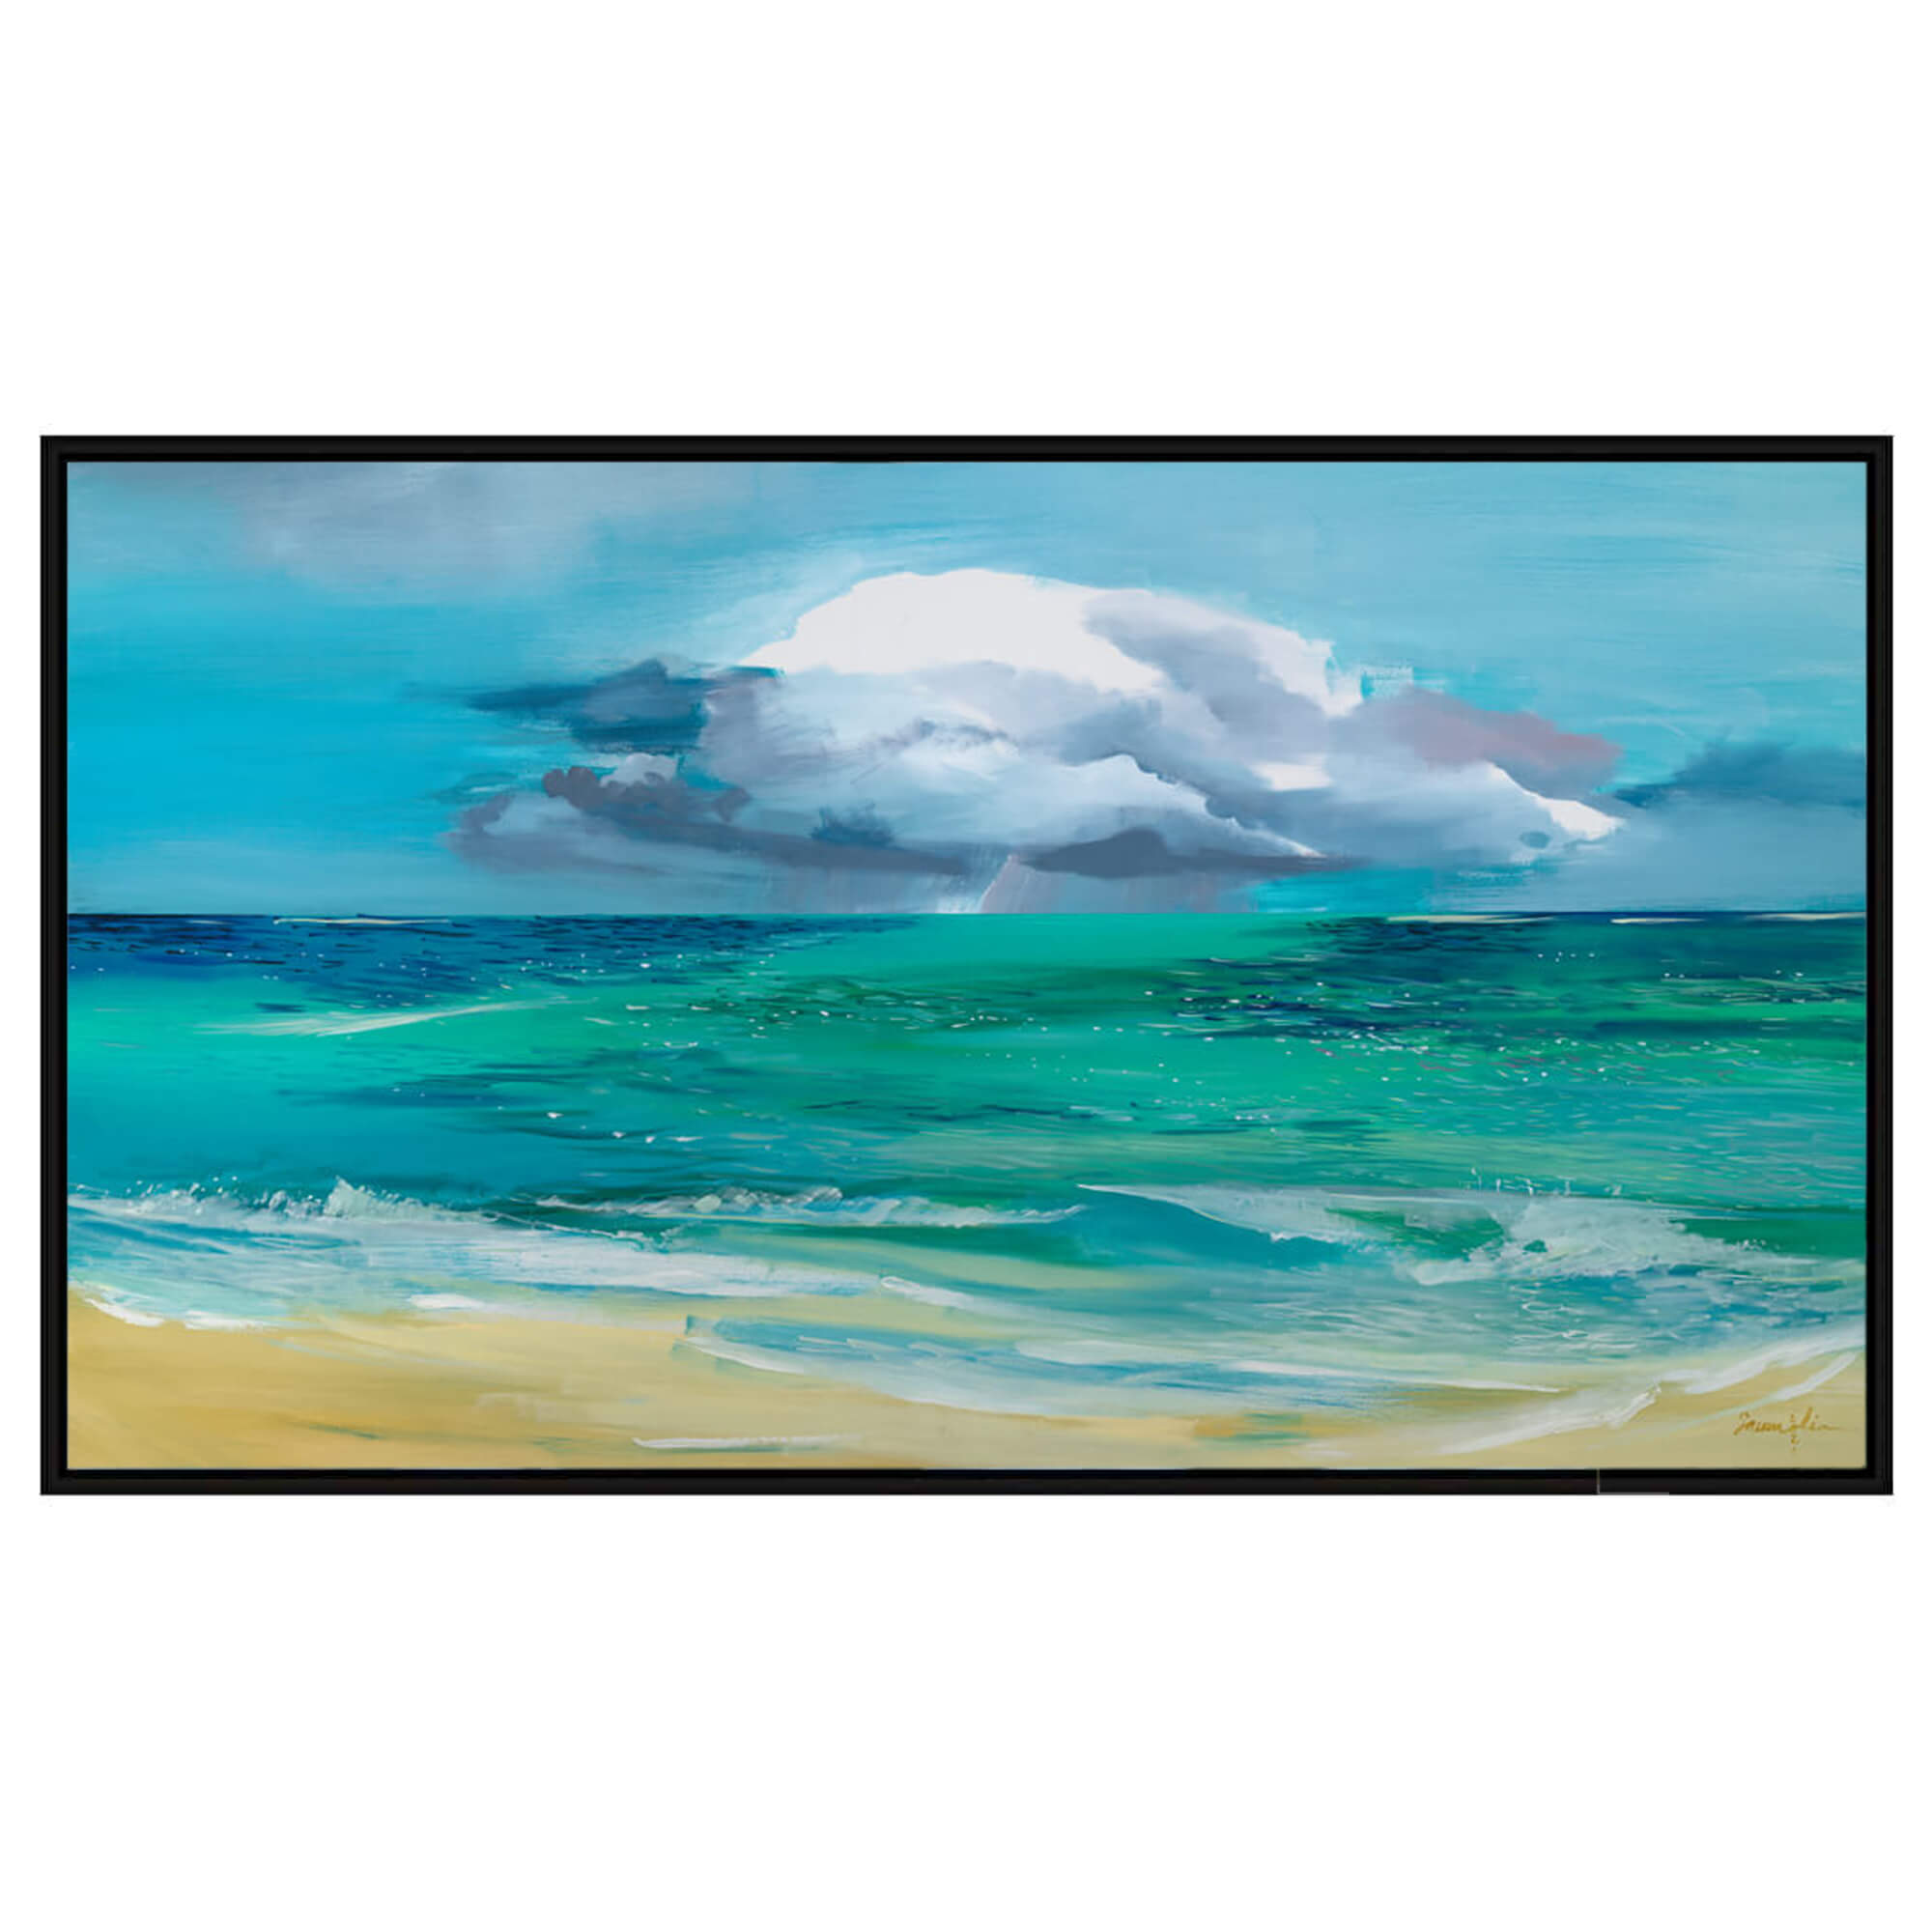 Framed canvas art print depicting calm tranquil waters leading to a beach oasis by Hawaii artist Saumolia Puapuaga 